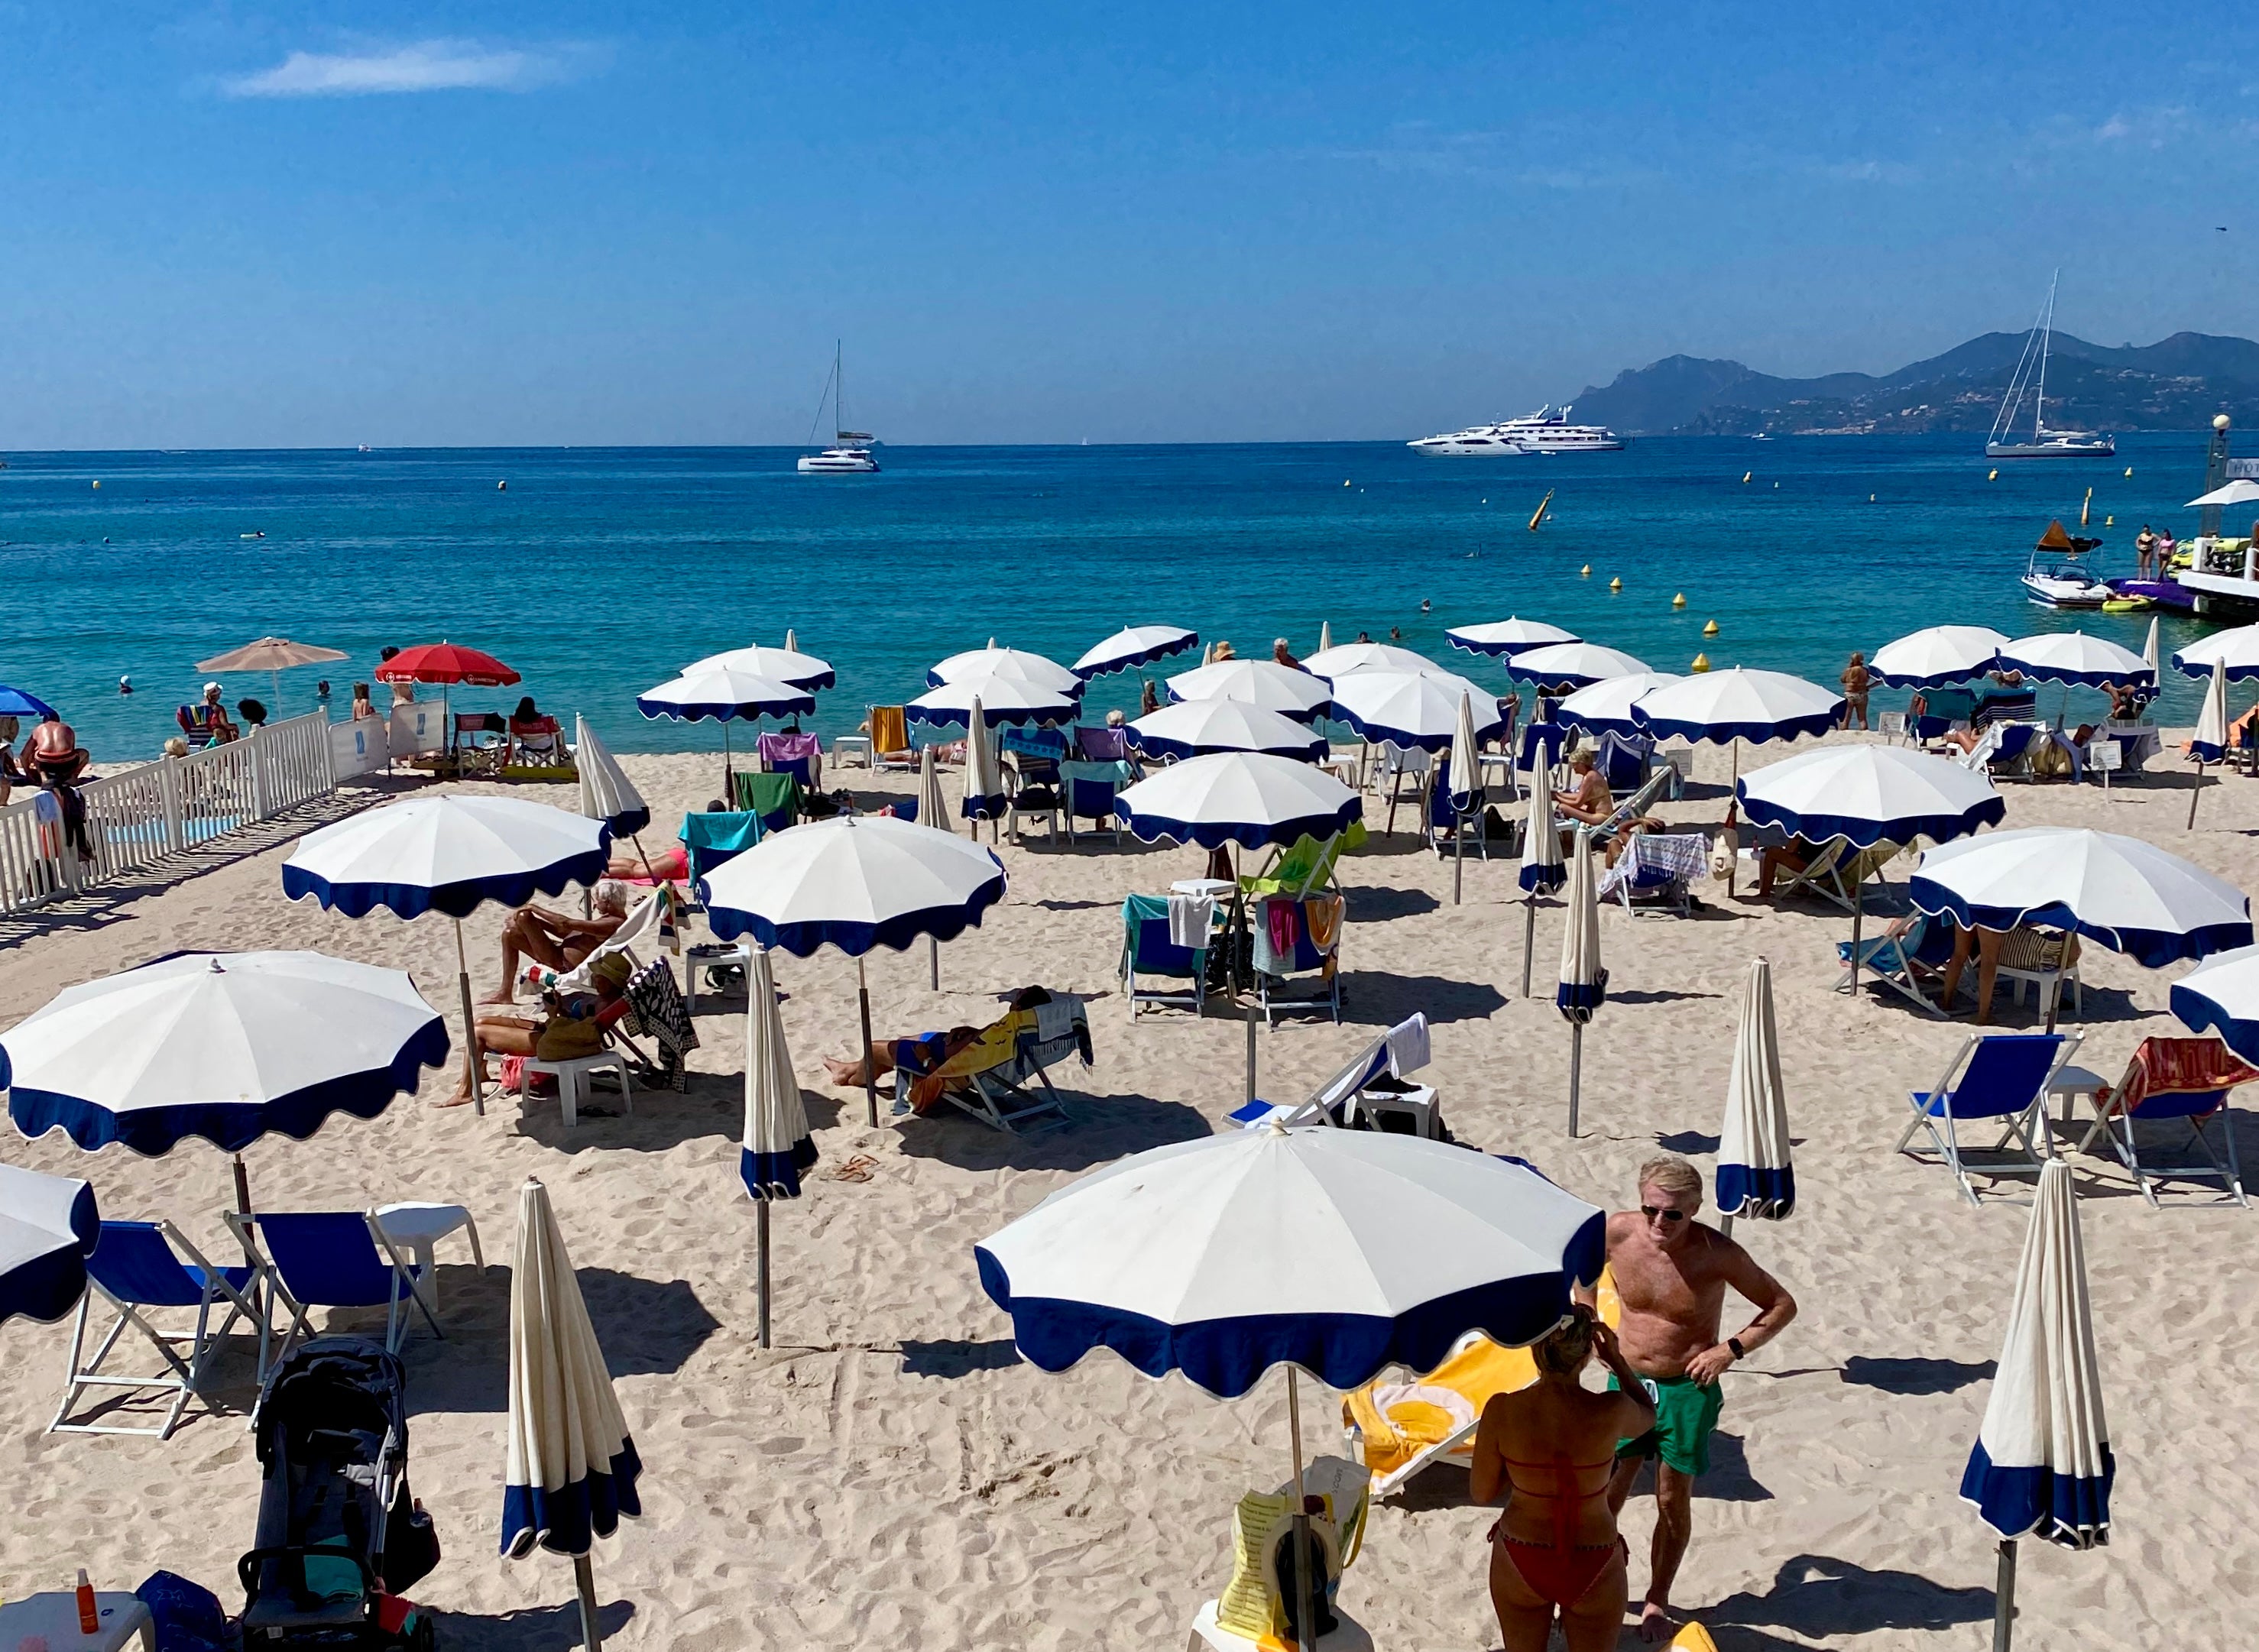 Mediterranean muddle: Some British holidaymakers have been asked to pay again for accommodation